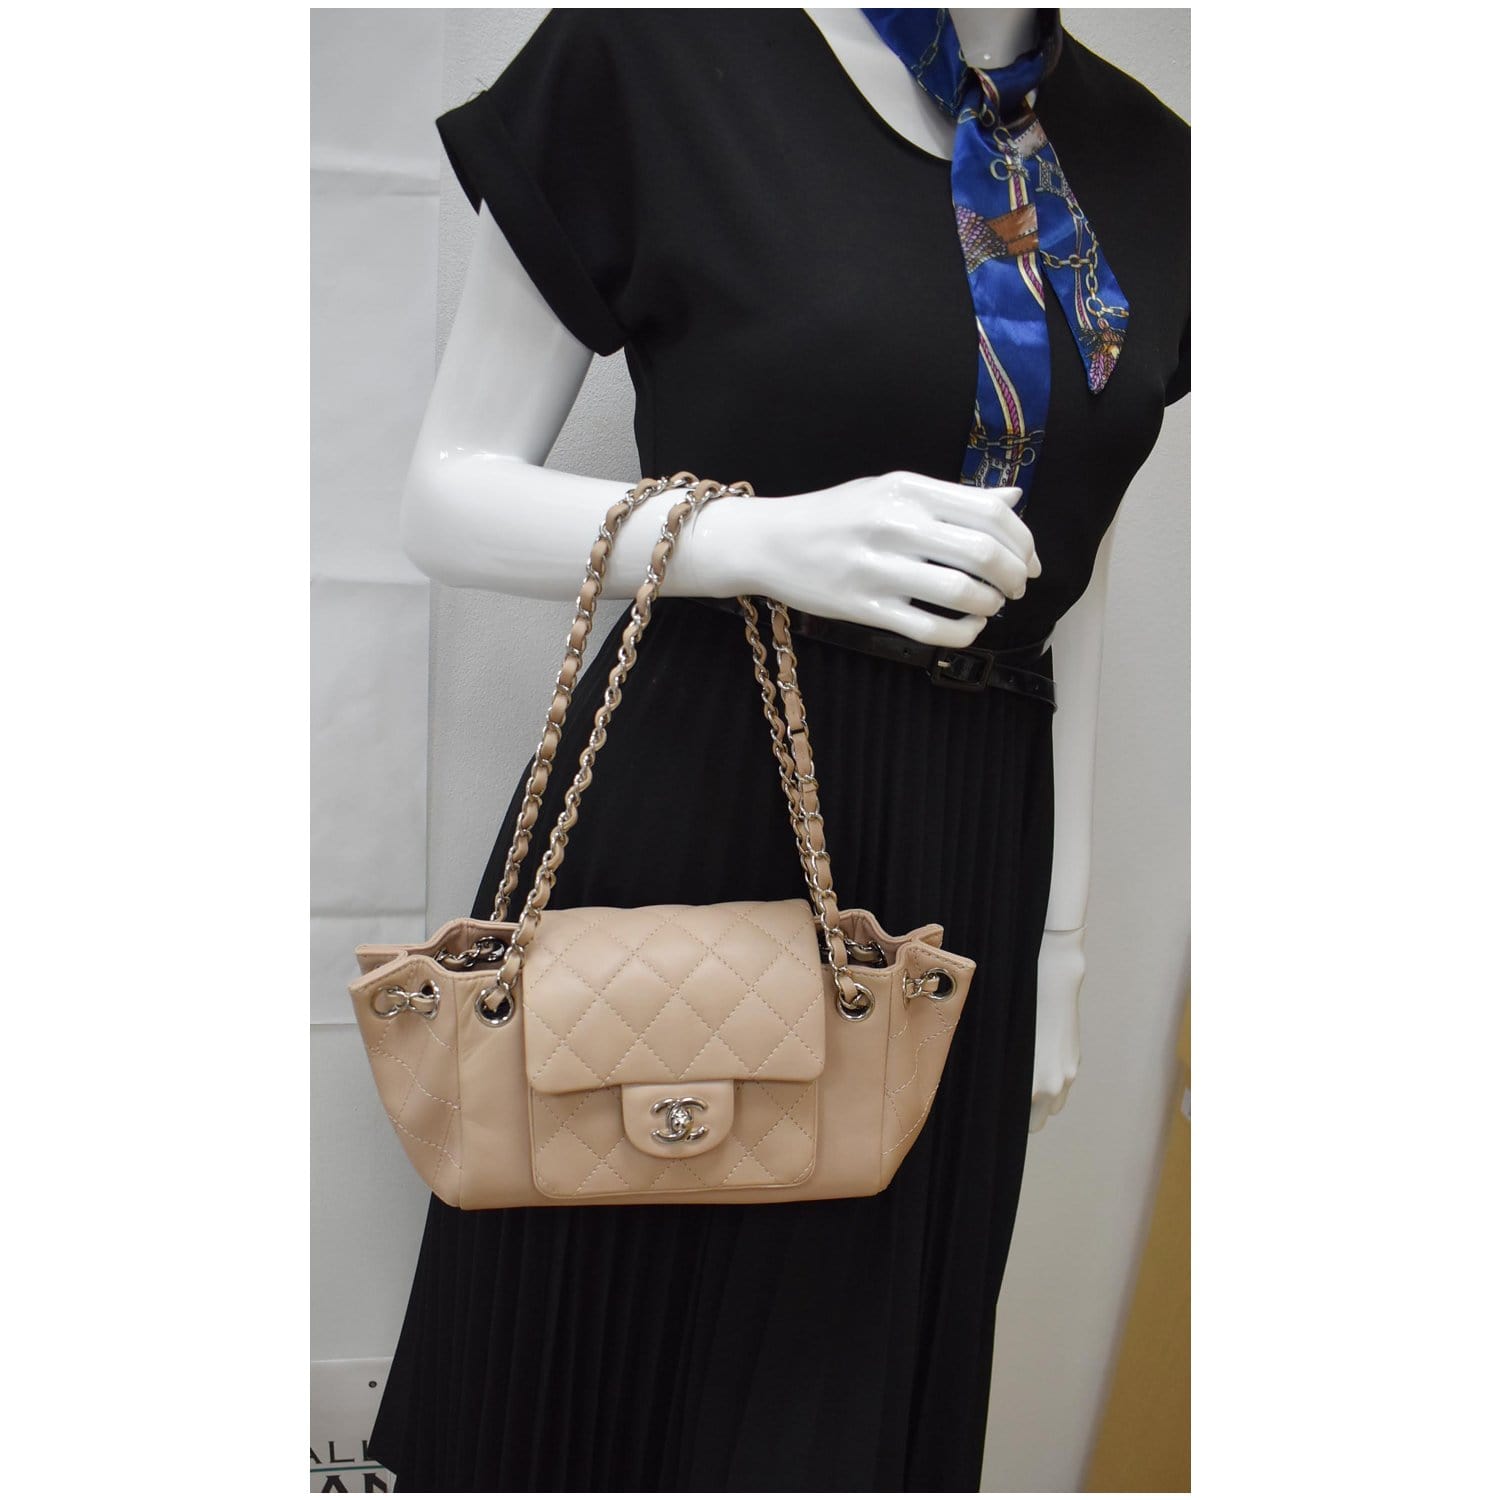 CHANEL, Bags, Chanel Lax Accordion Brown Beige Wool Bag